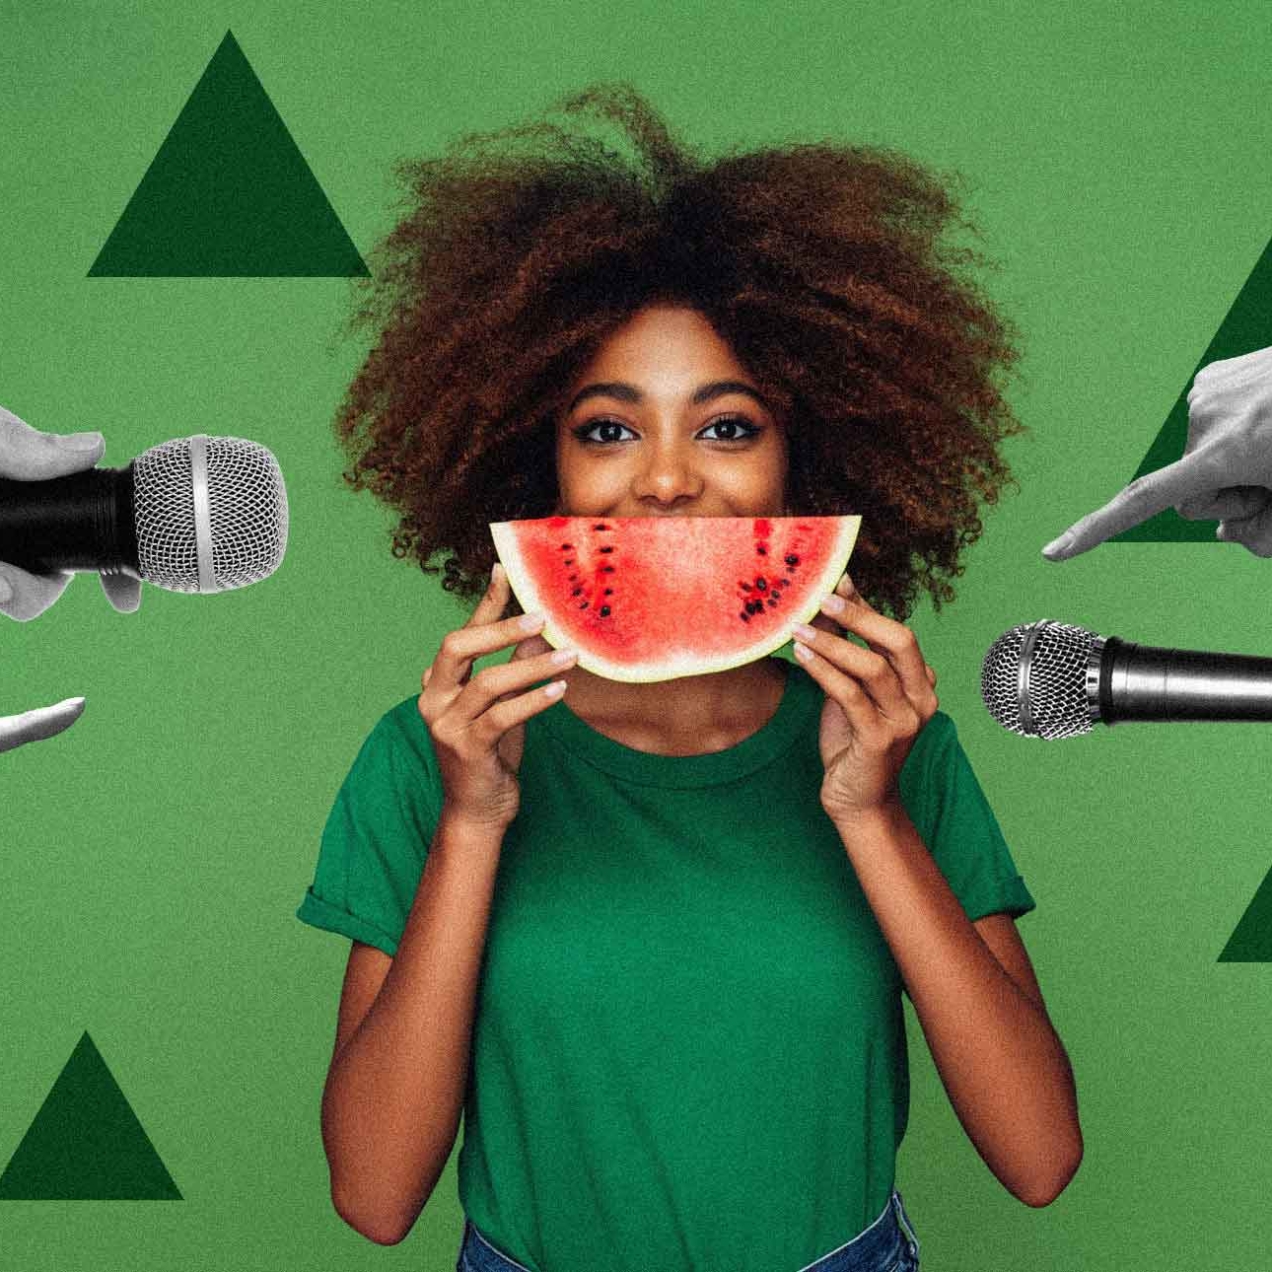 Woman centre of image in green t-shirt holding a slice of melon Infront of her mouth, whilst either side of her there are two hands pointing fingers toward her, and two hands holding microphones toward her.